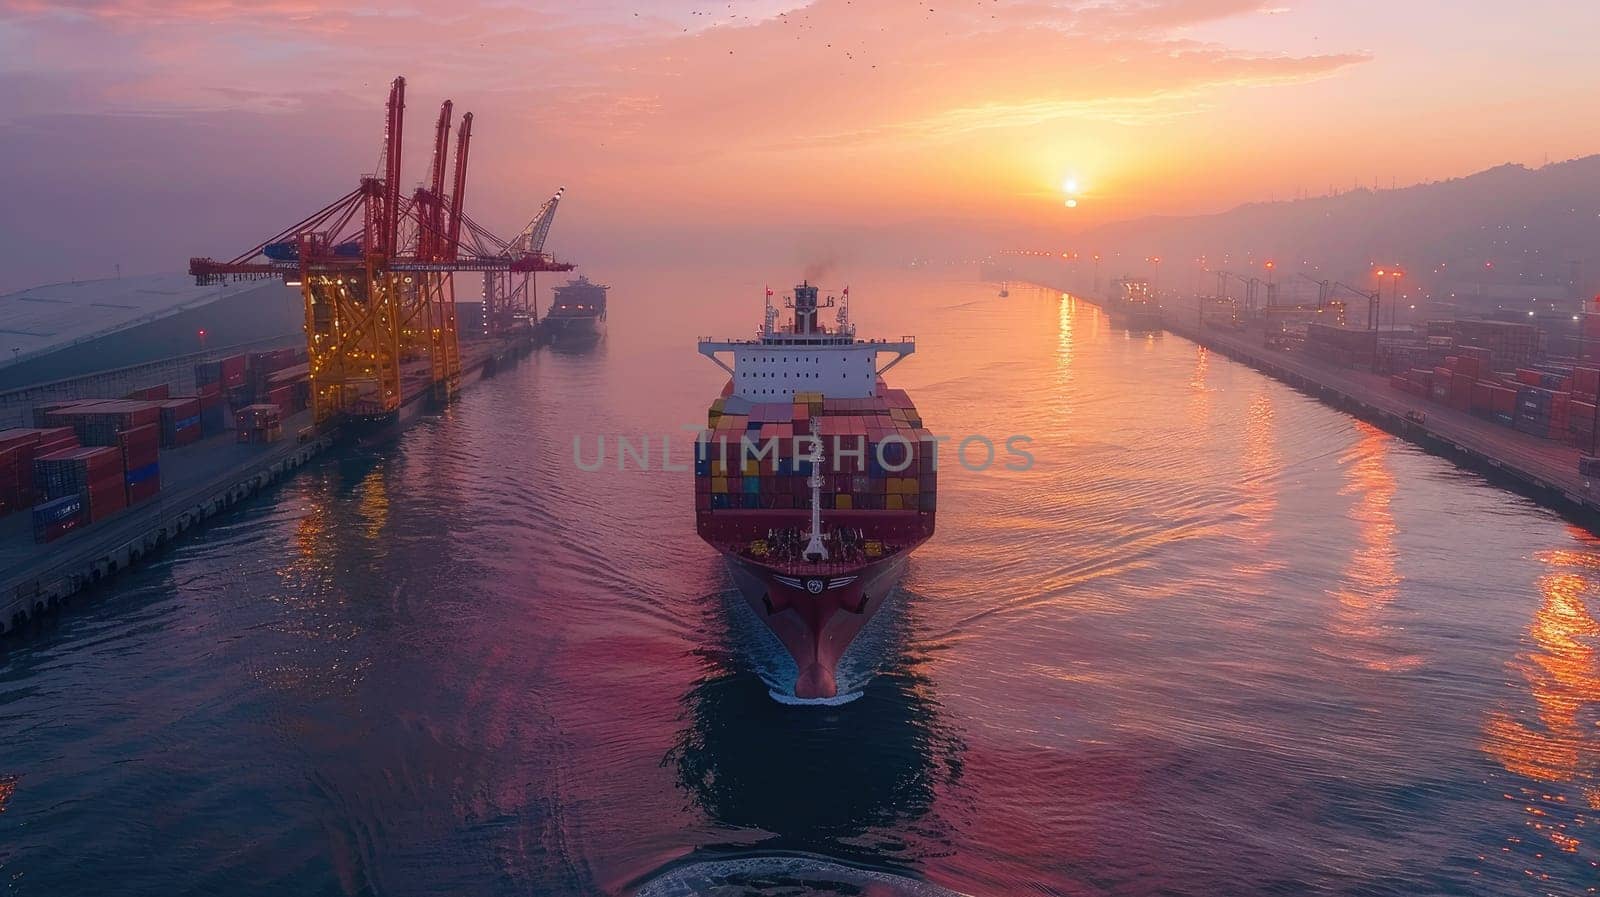 Cargo ship dwarfs colorful container cranes as it enters a bustling international port at sunrise. by Chawagen